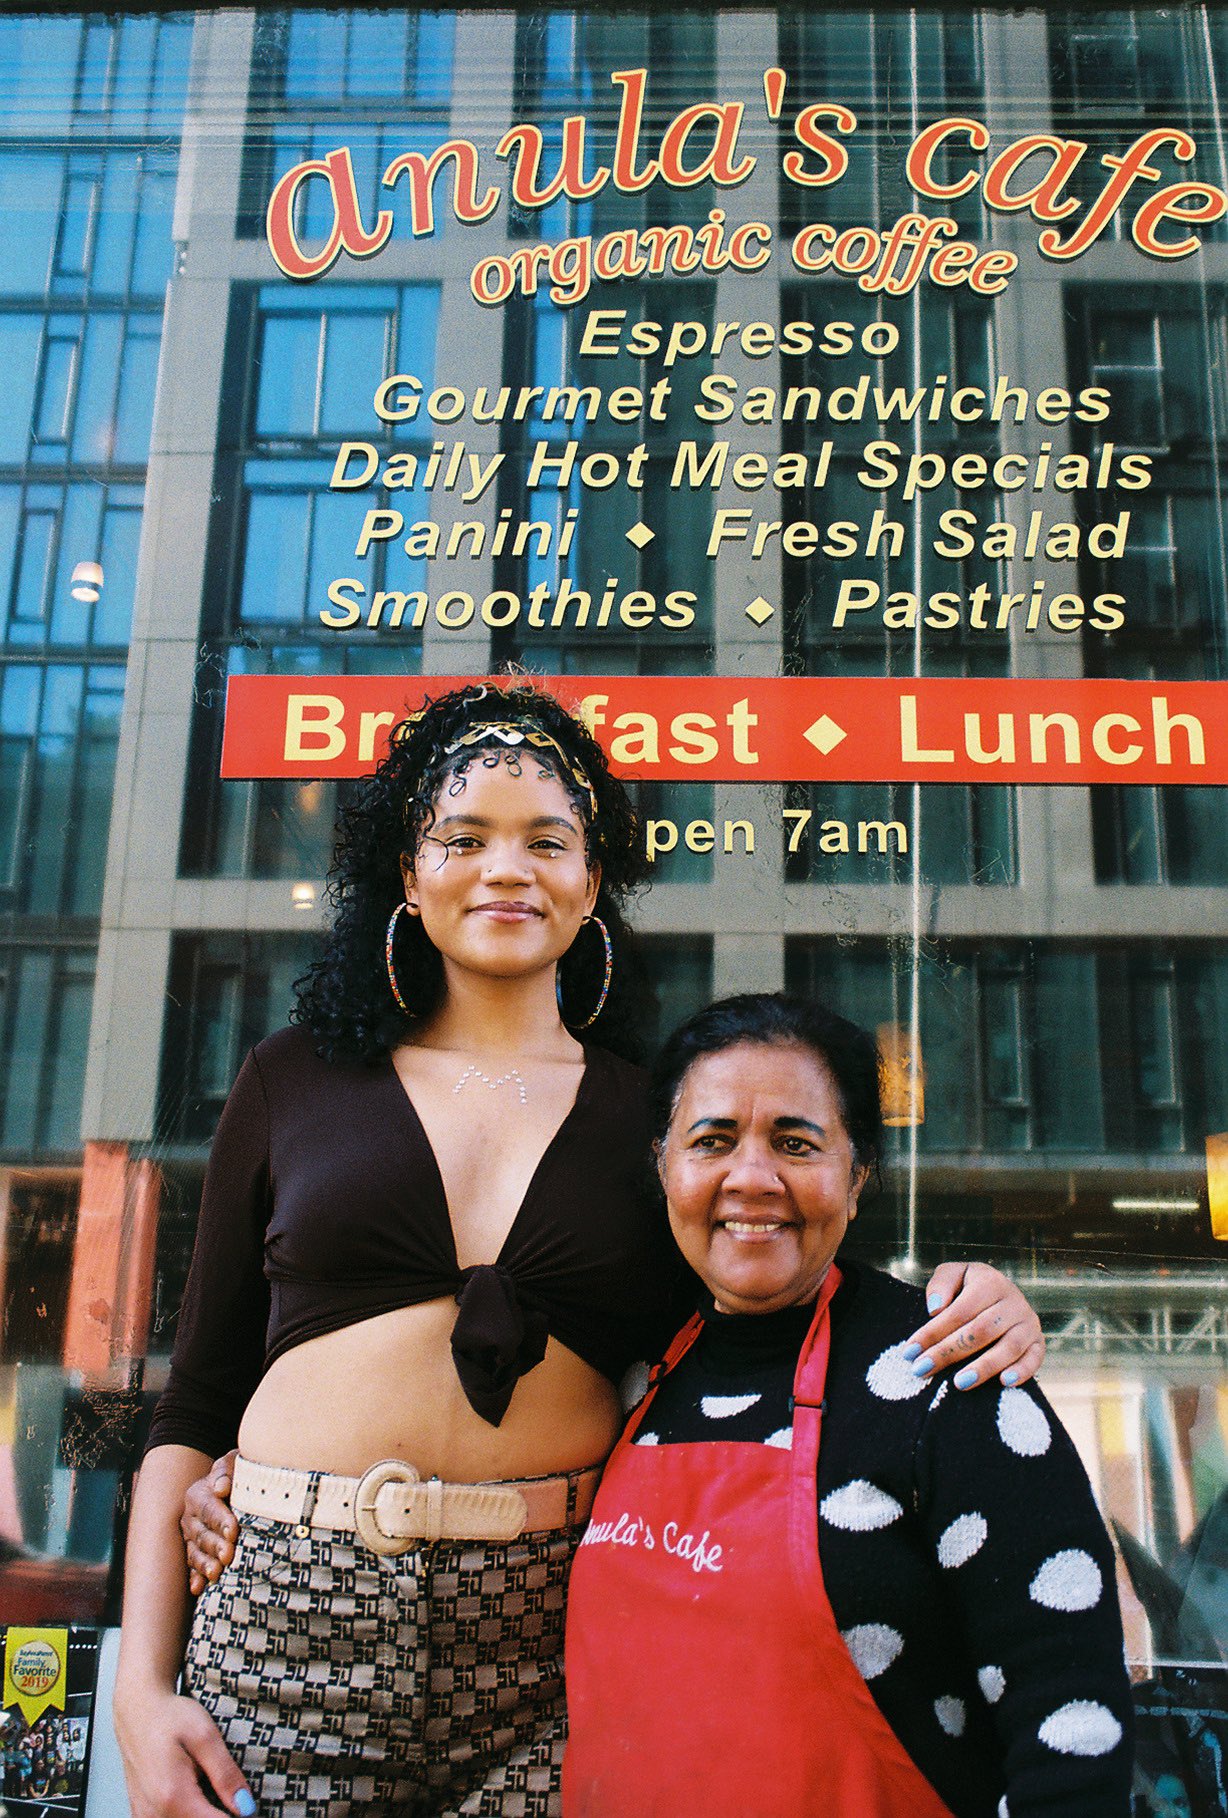 Anula Edirisinghe and her daughter Maya Rapier pose in front of Anula's Cafe; the sign in the window advertises the restaurant's offerings: "espresso, gourmet sandwiches, daily hot meal specials," and so on.